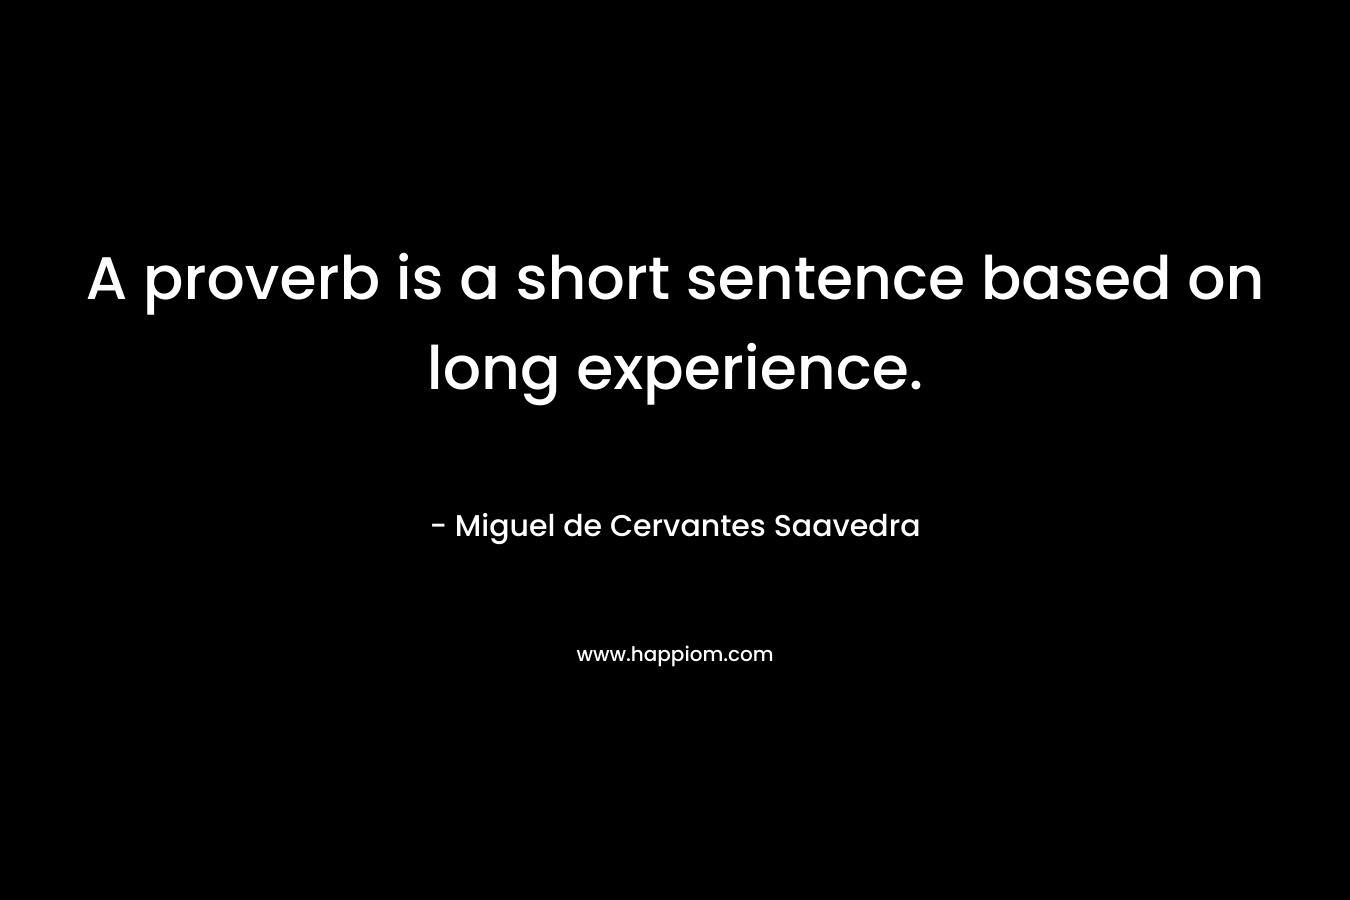 A proverb is a short sentence based on long experience. – Miguel de Cervantes Saavedra